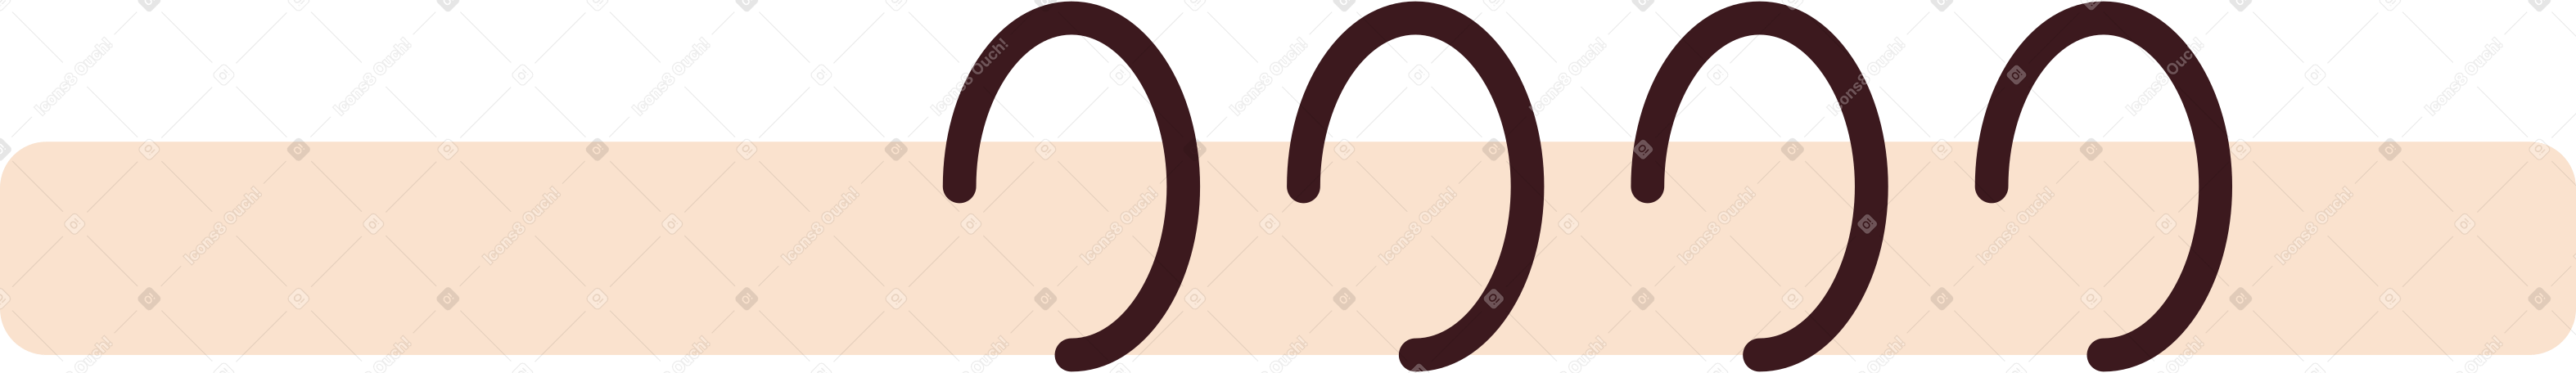 notepad with rings Illustration in PNG, SVG